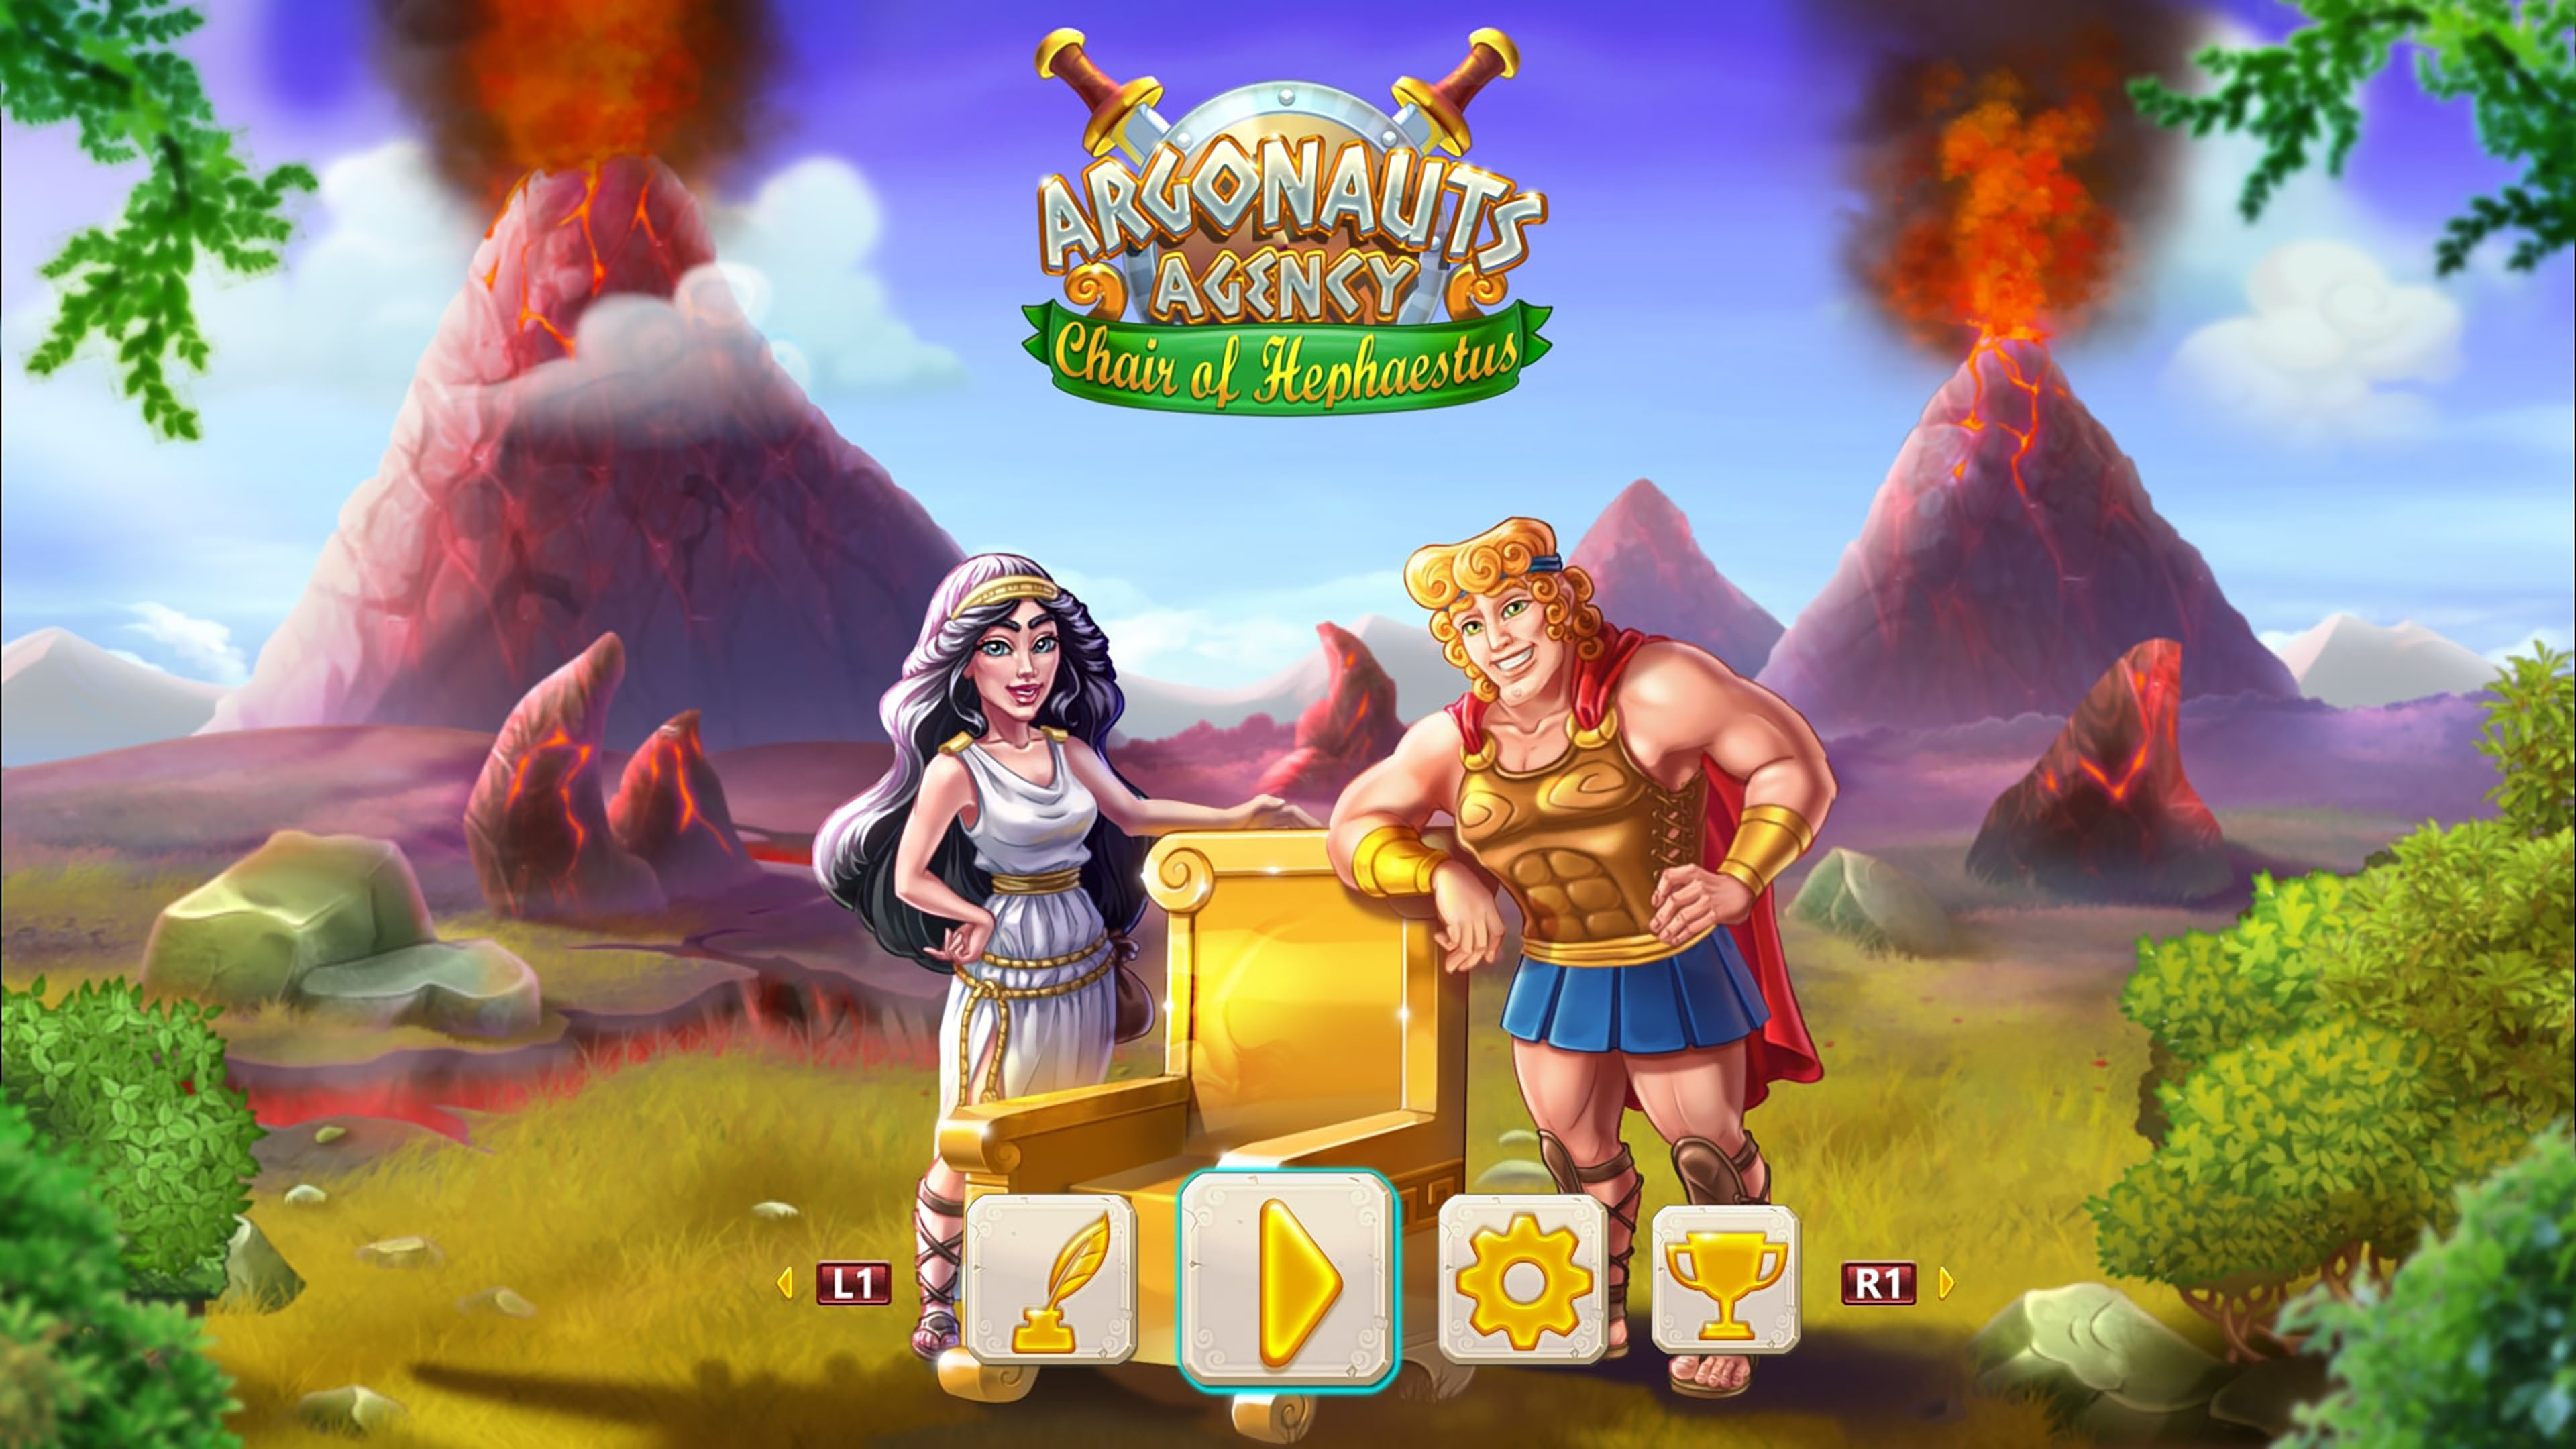 Argonauts Agency - Captive of Circe Collector's Edition - Play